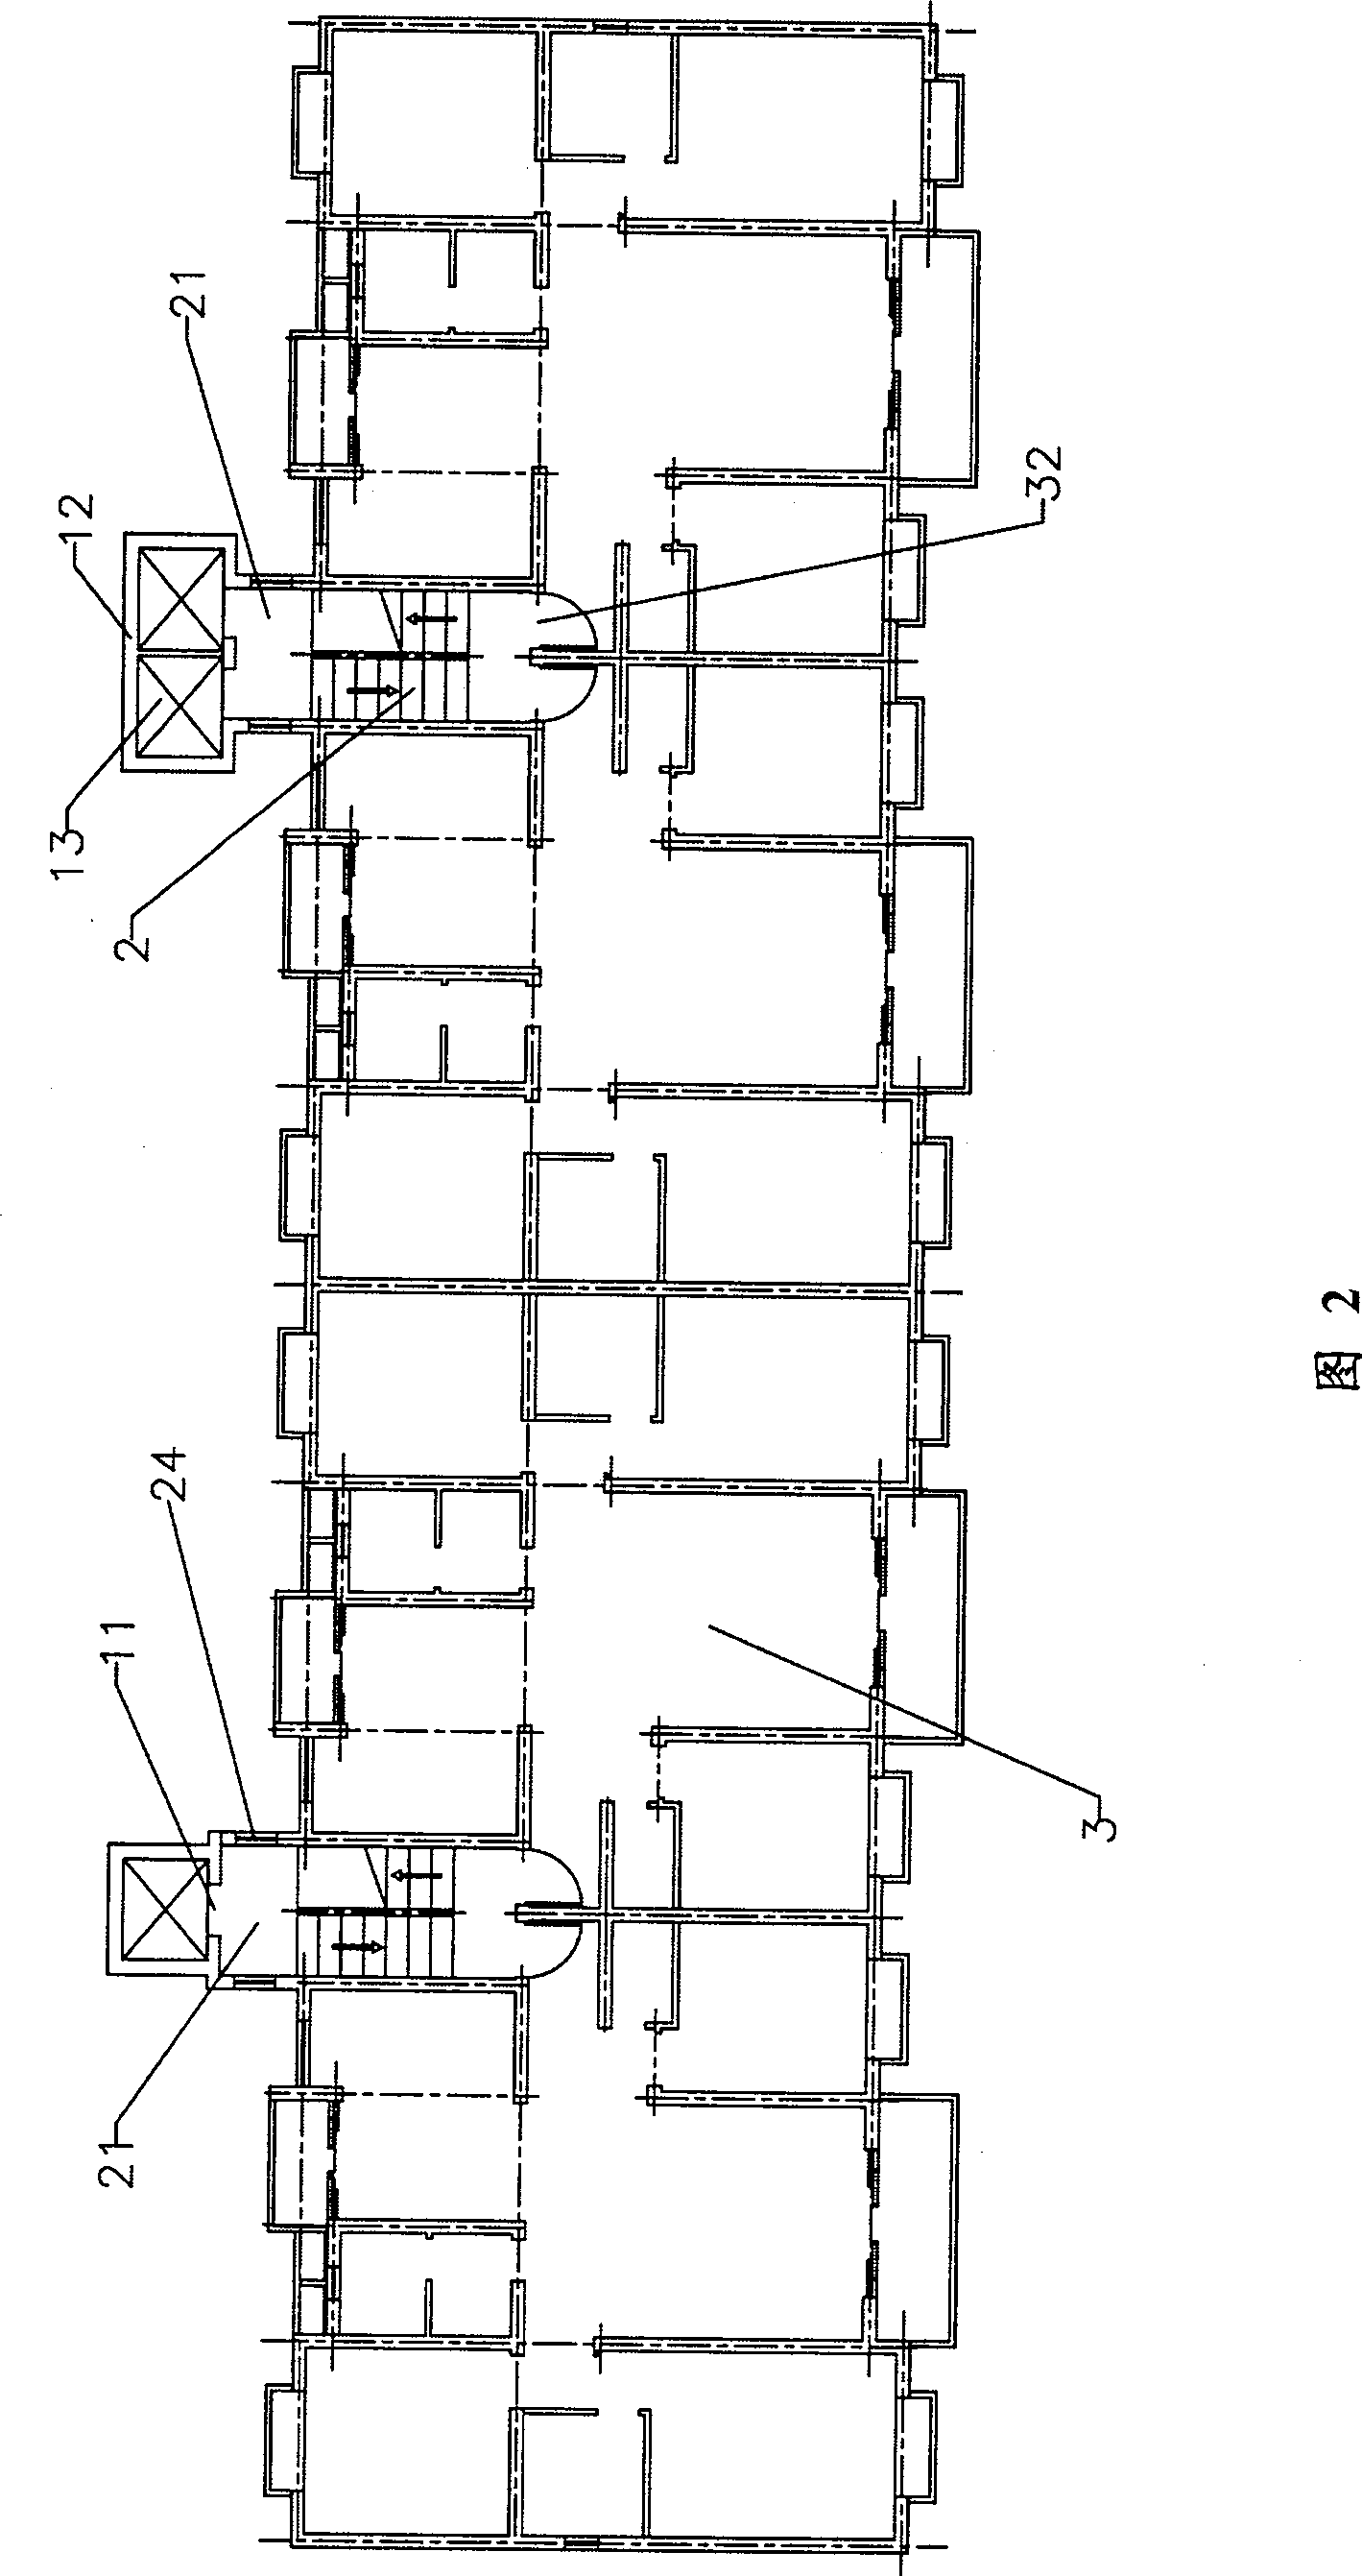 A sharing structure of storied building elevators and stairs